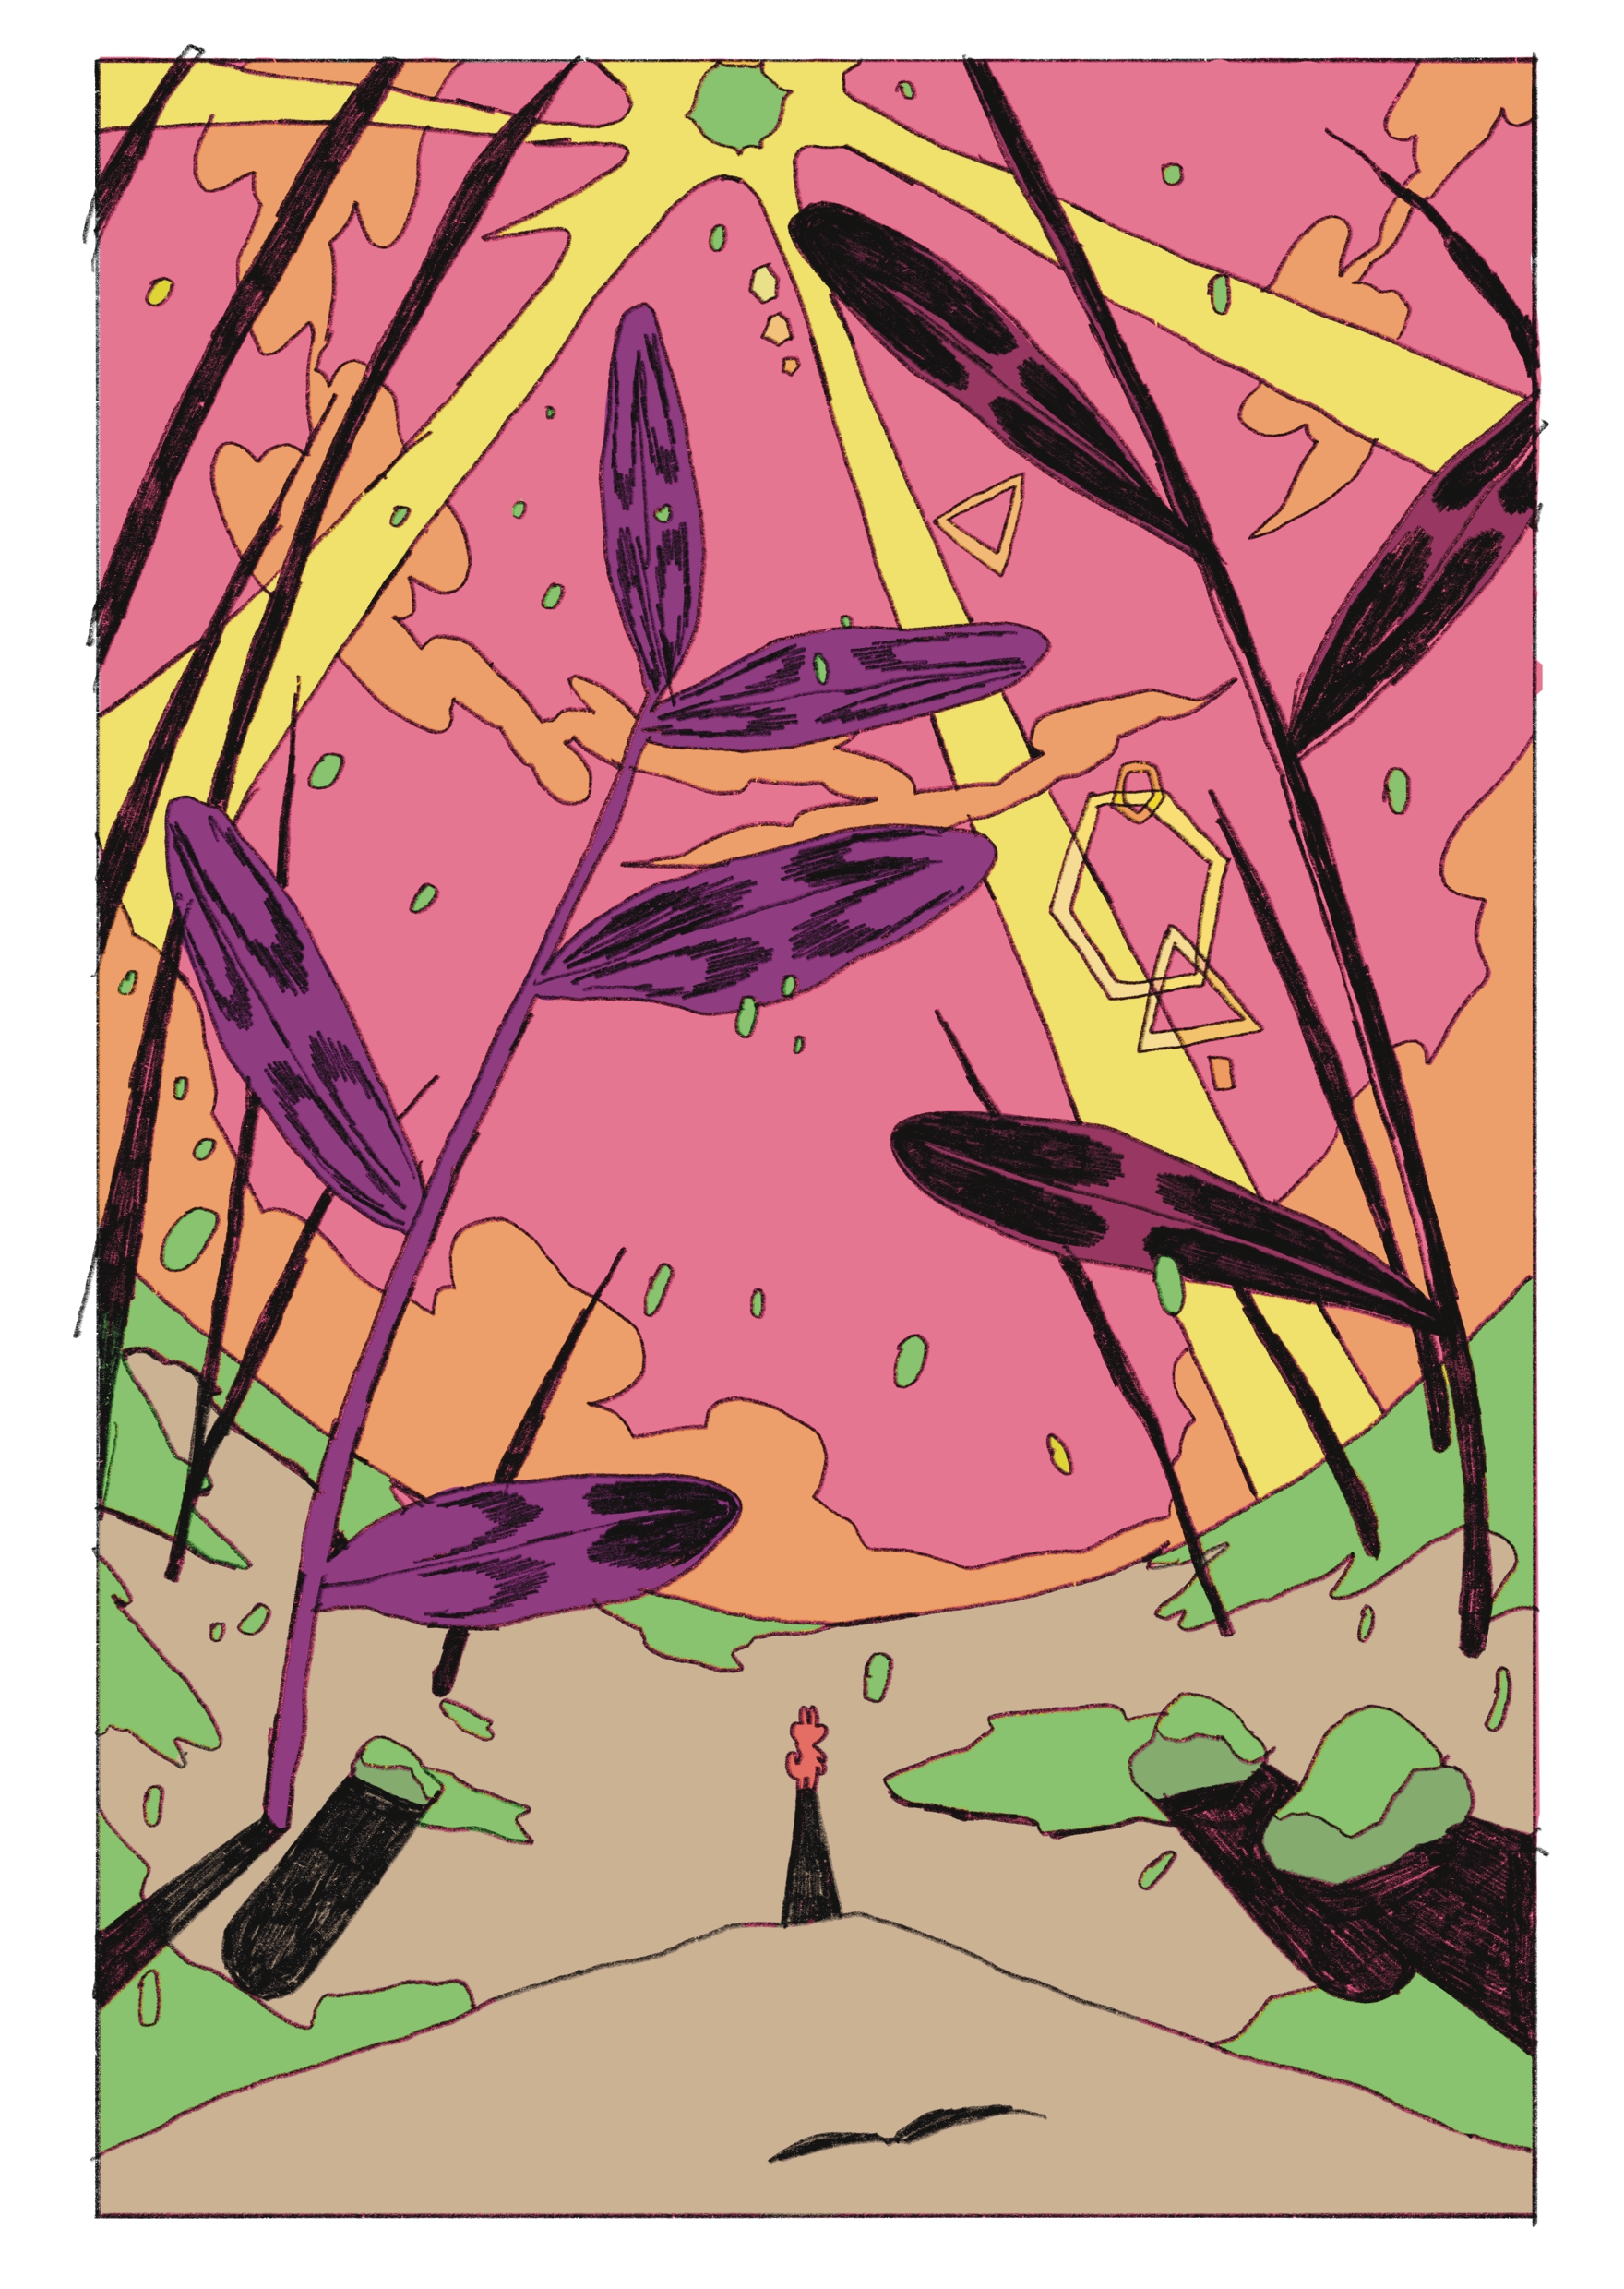 Digital illustration showing a small ant staring up at a pink sky.